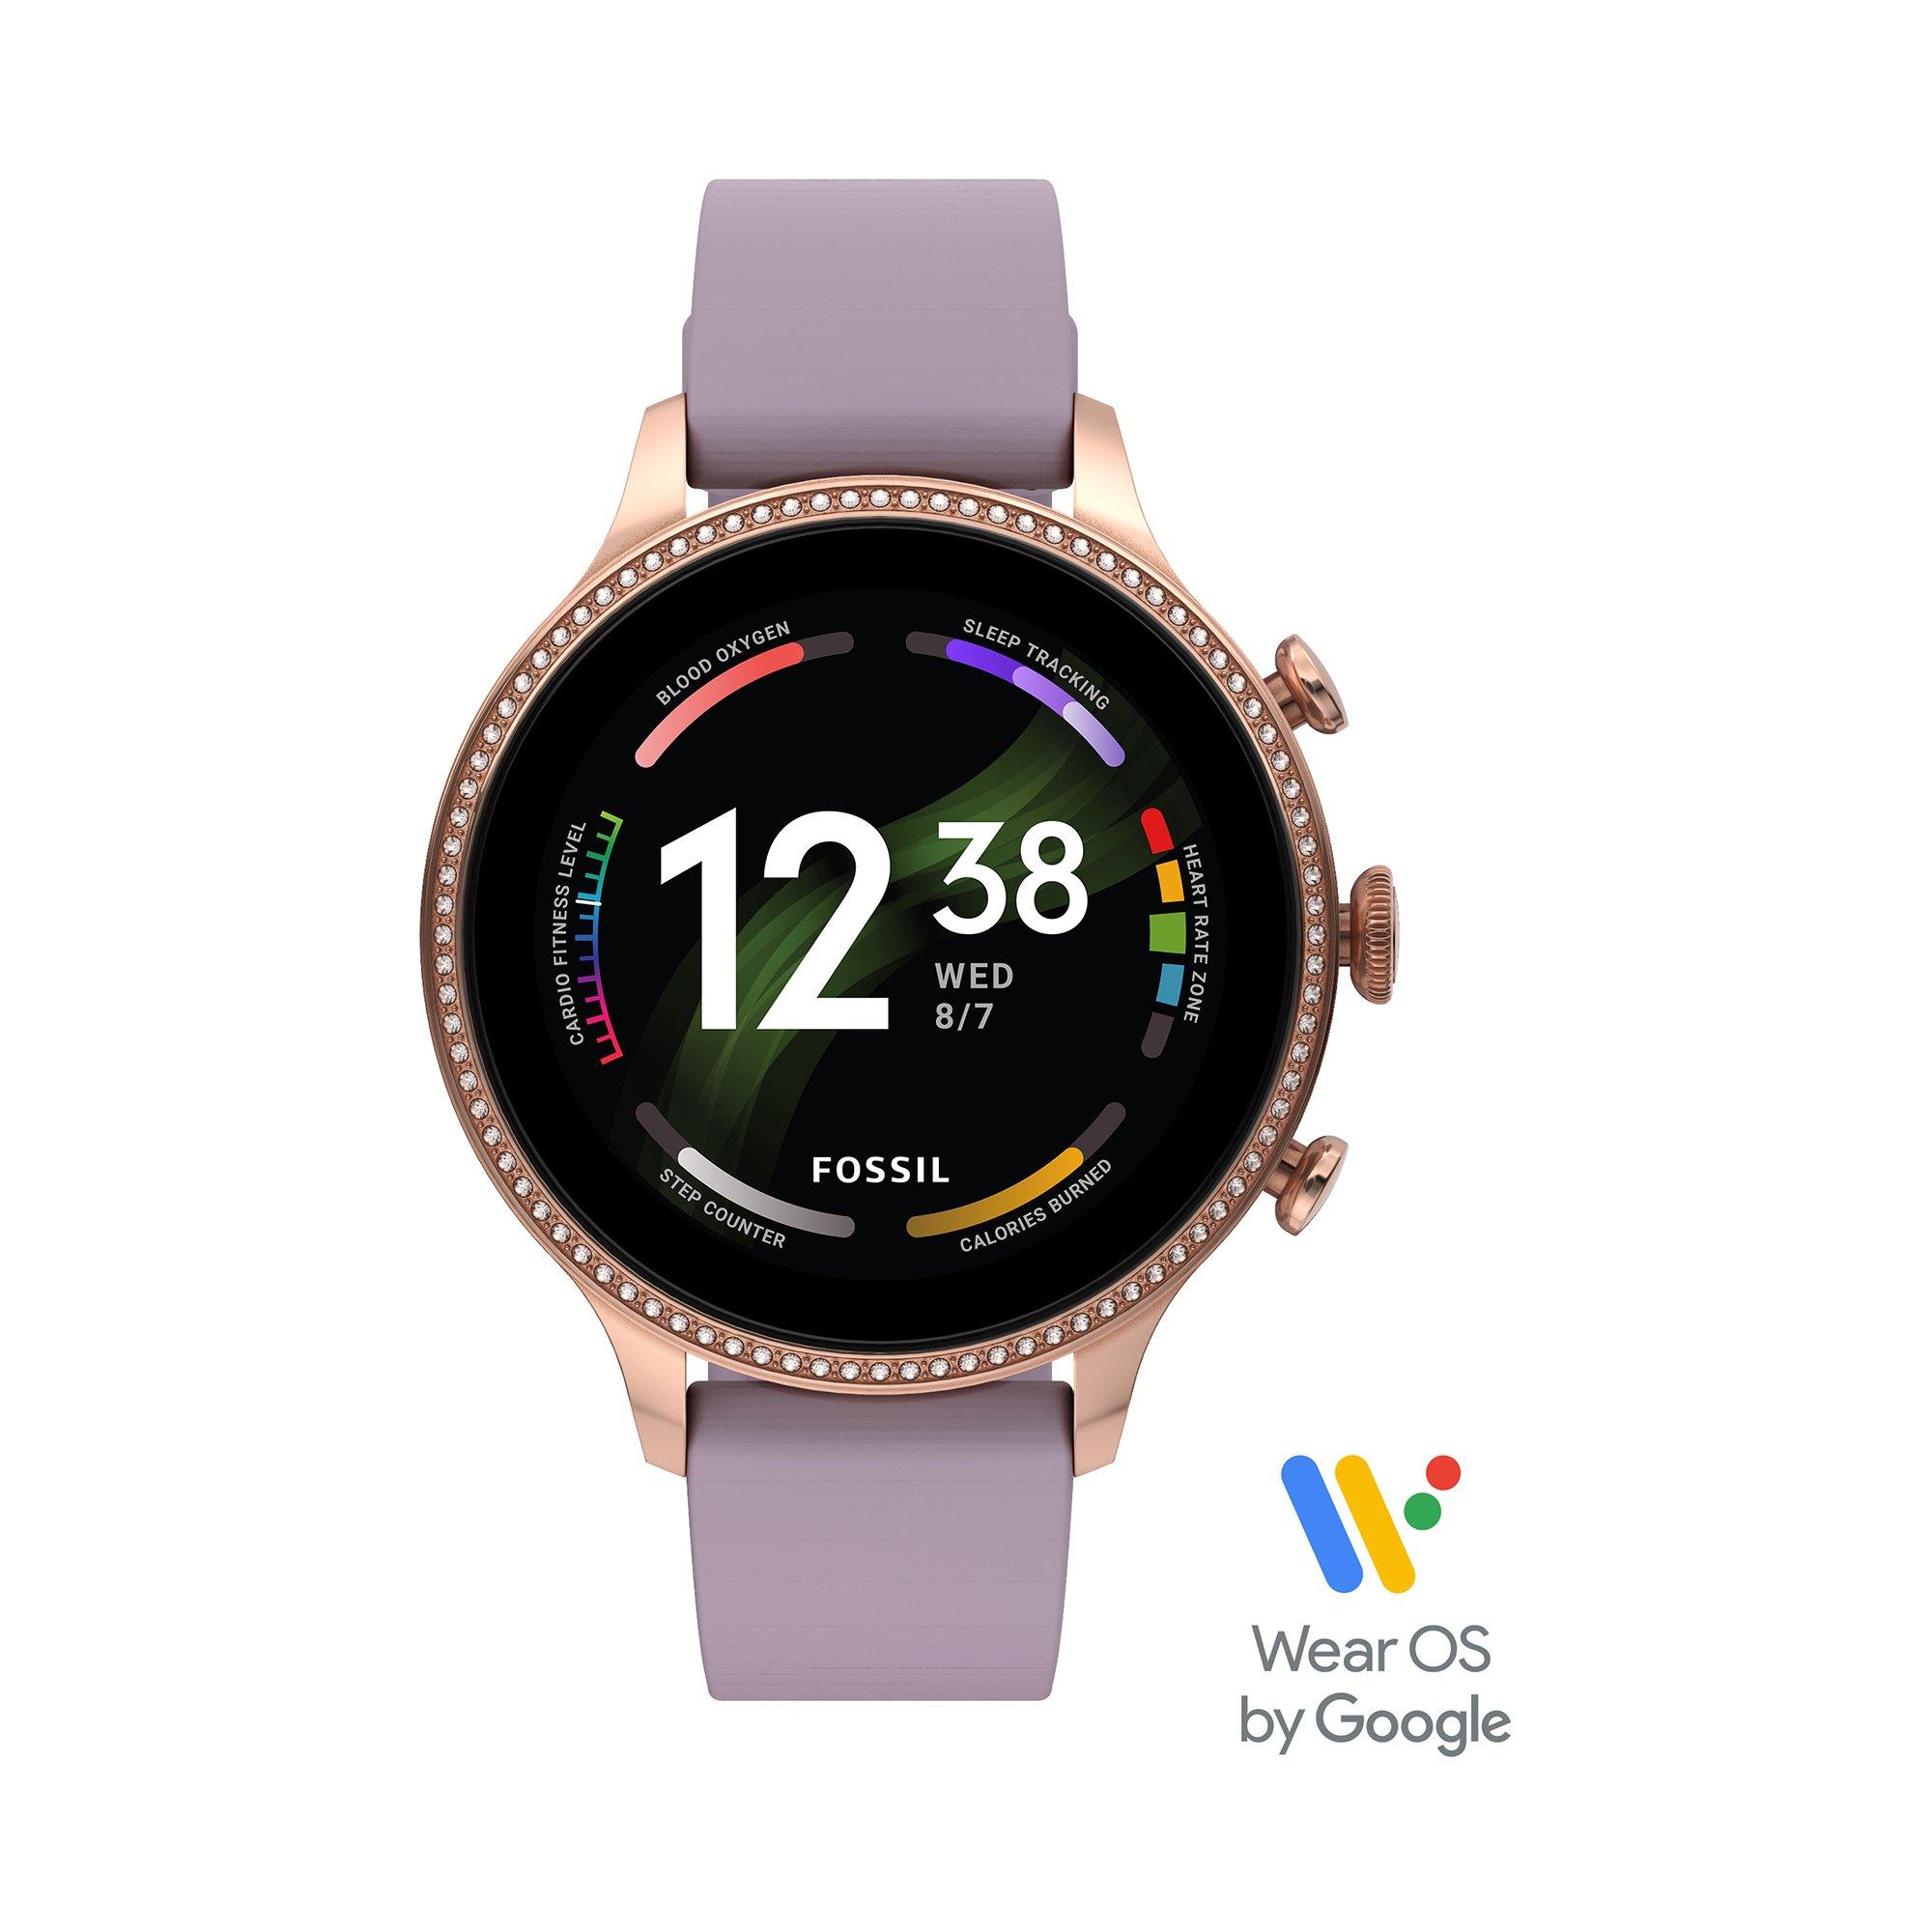 Image of FOSSIL GEN 6 Smartwatch Display - 42mm